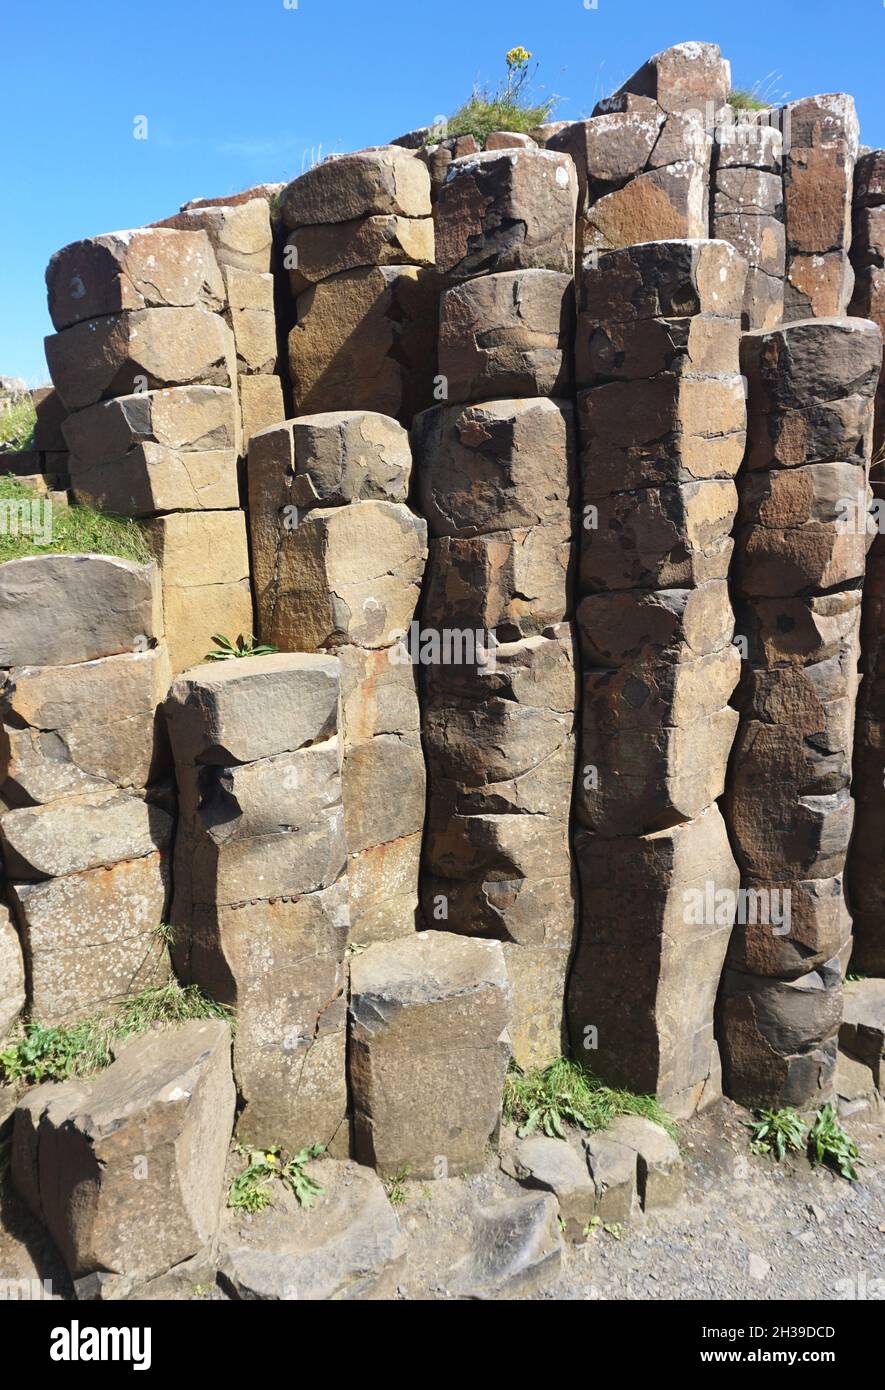 Formation of basalt stone pillars created by volcanic eruption 50 million years ago at The Giant's Causeway, on the north coast of Northern Ireland Stock Photo